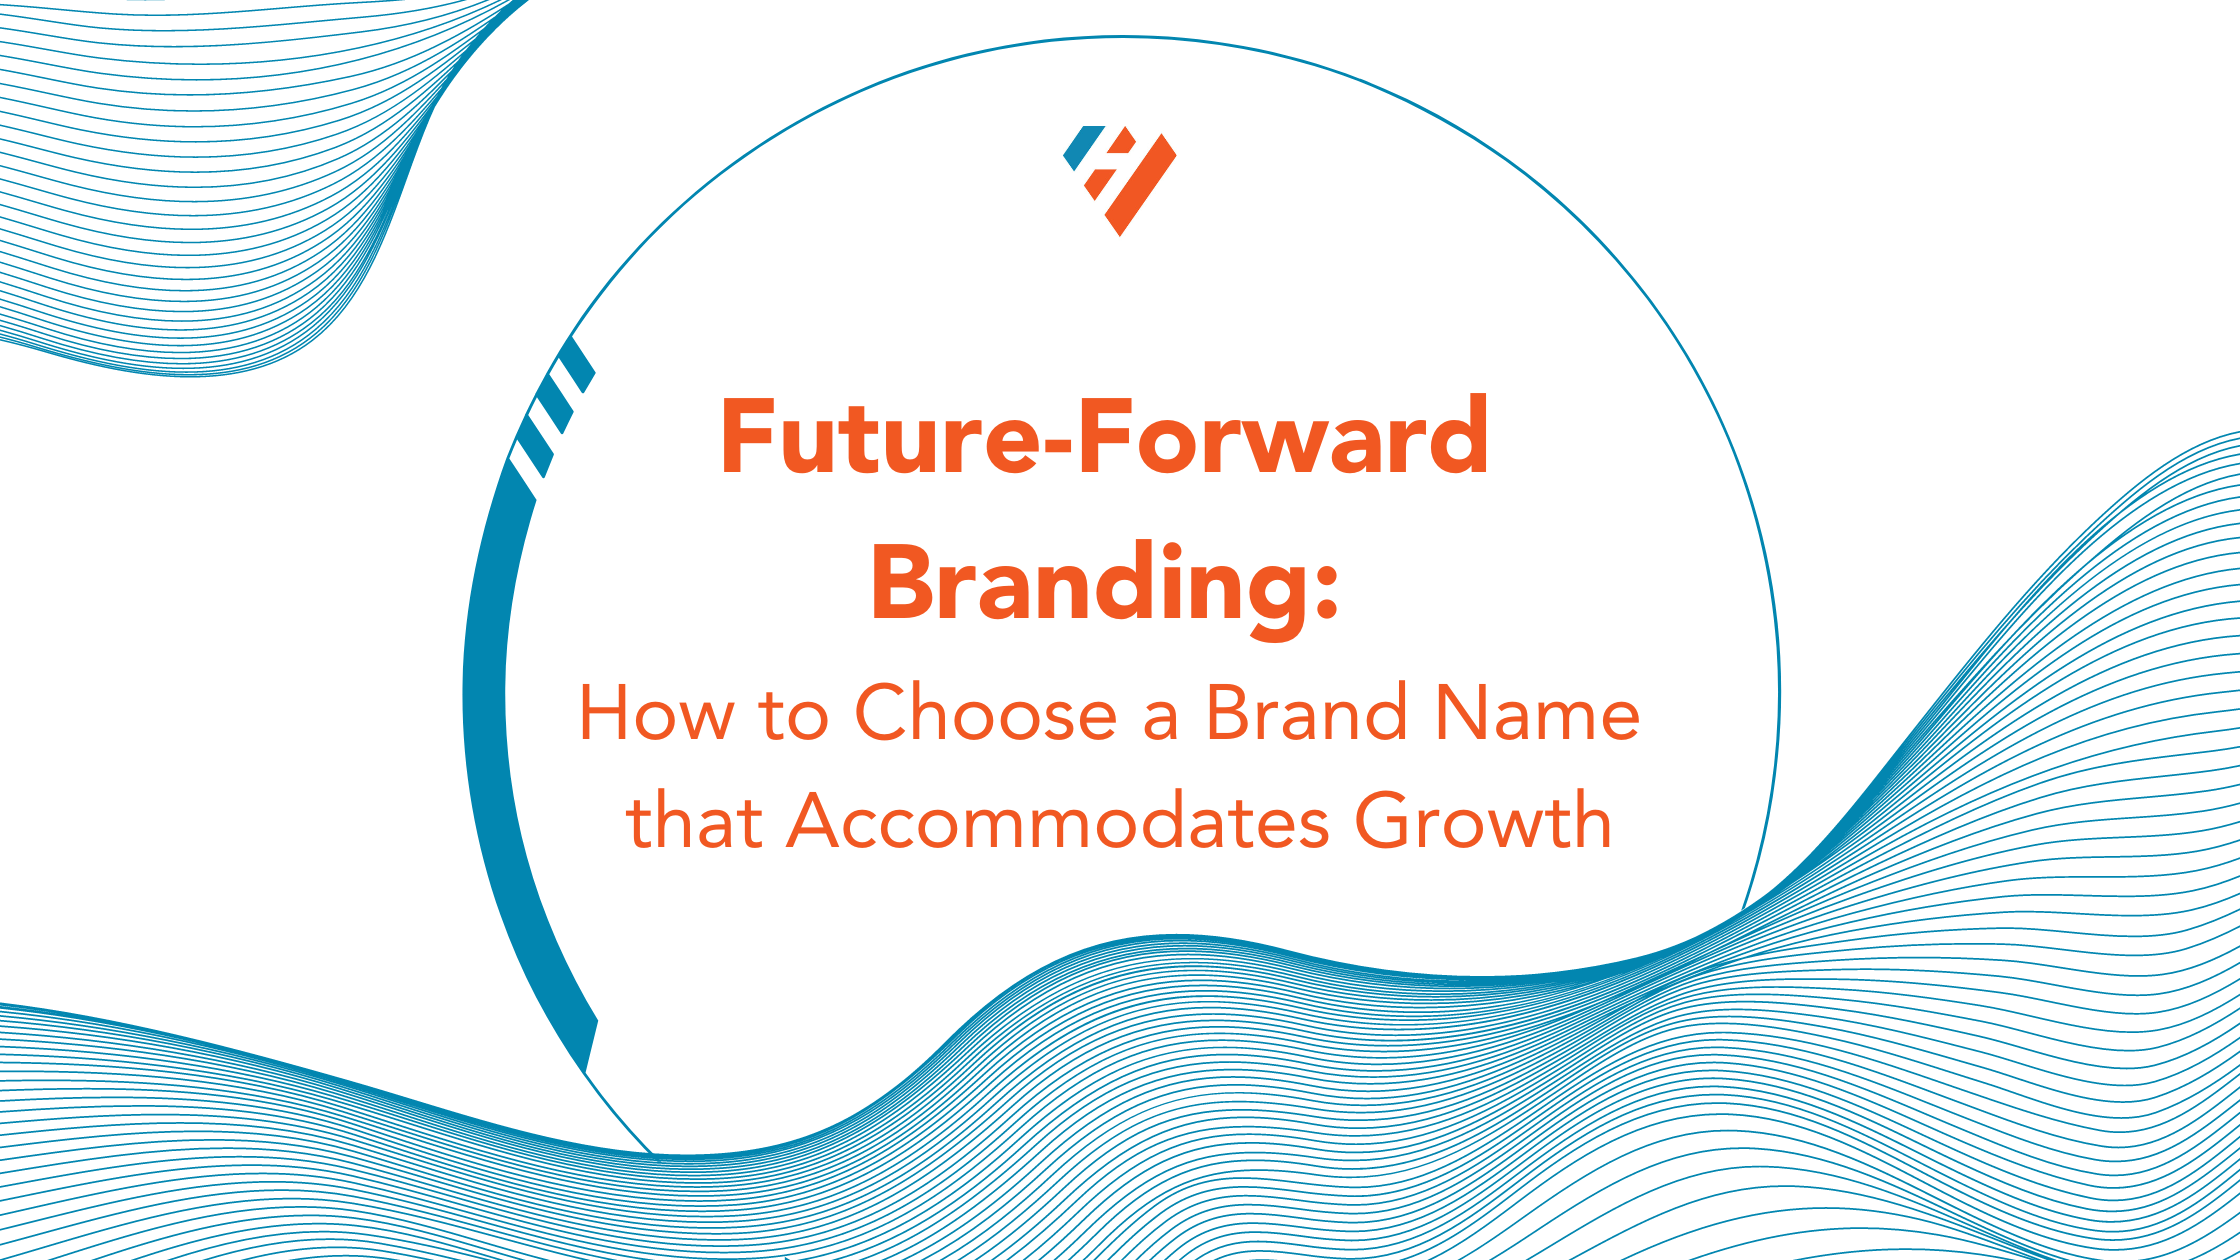 Future Forward Branding - How to choose a brand name that accommodates growth